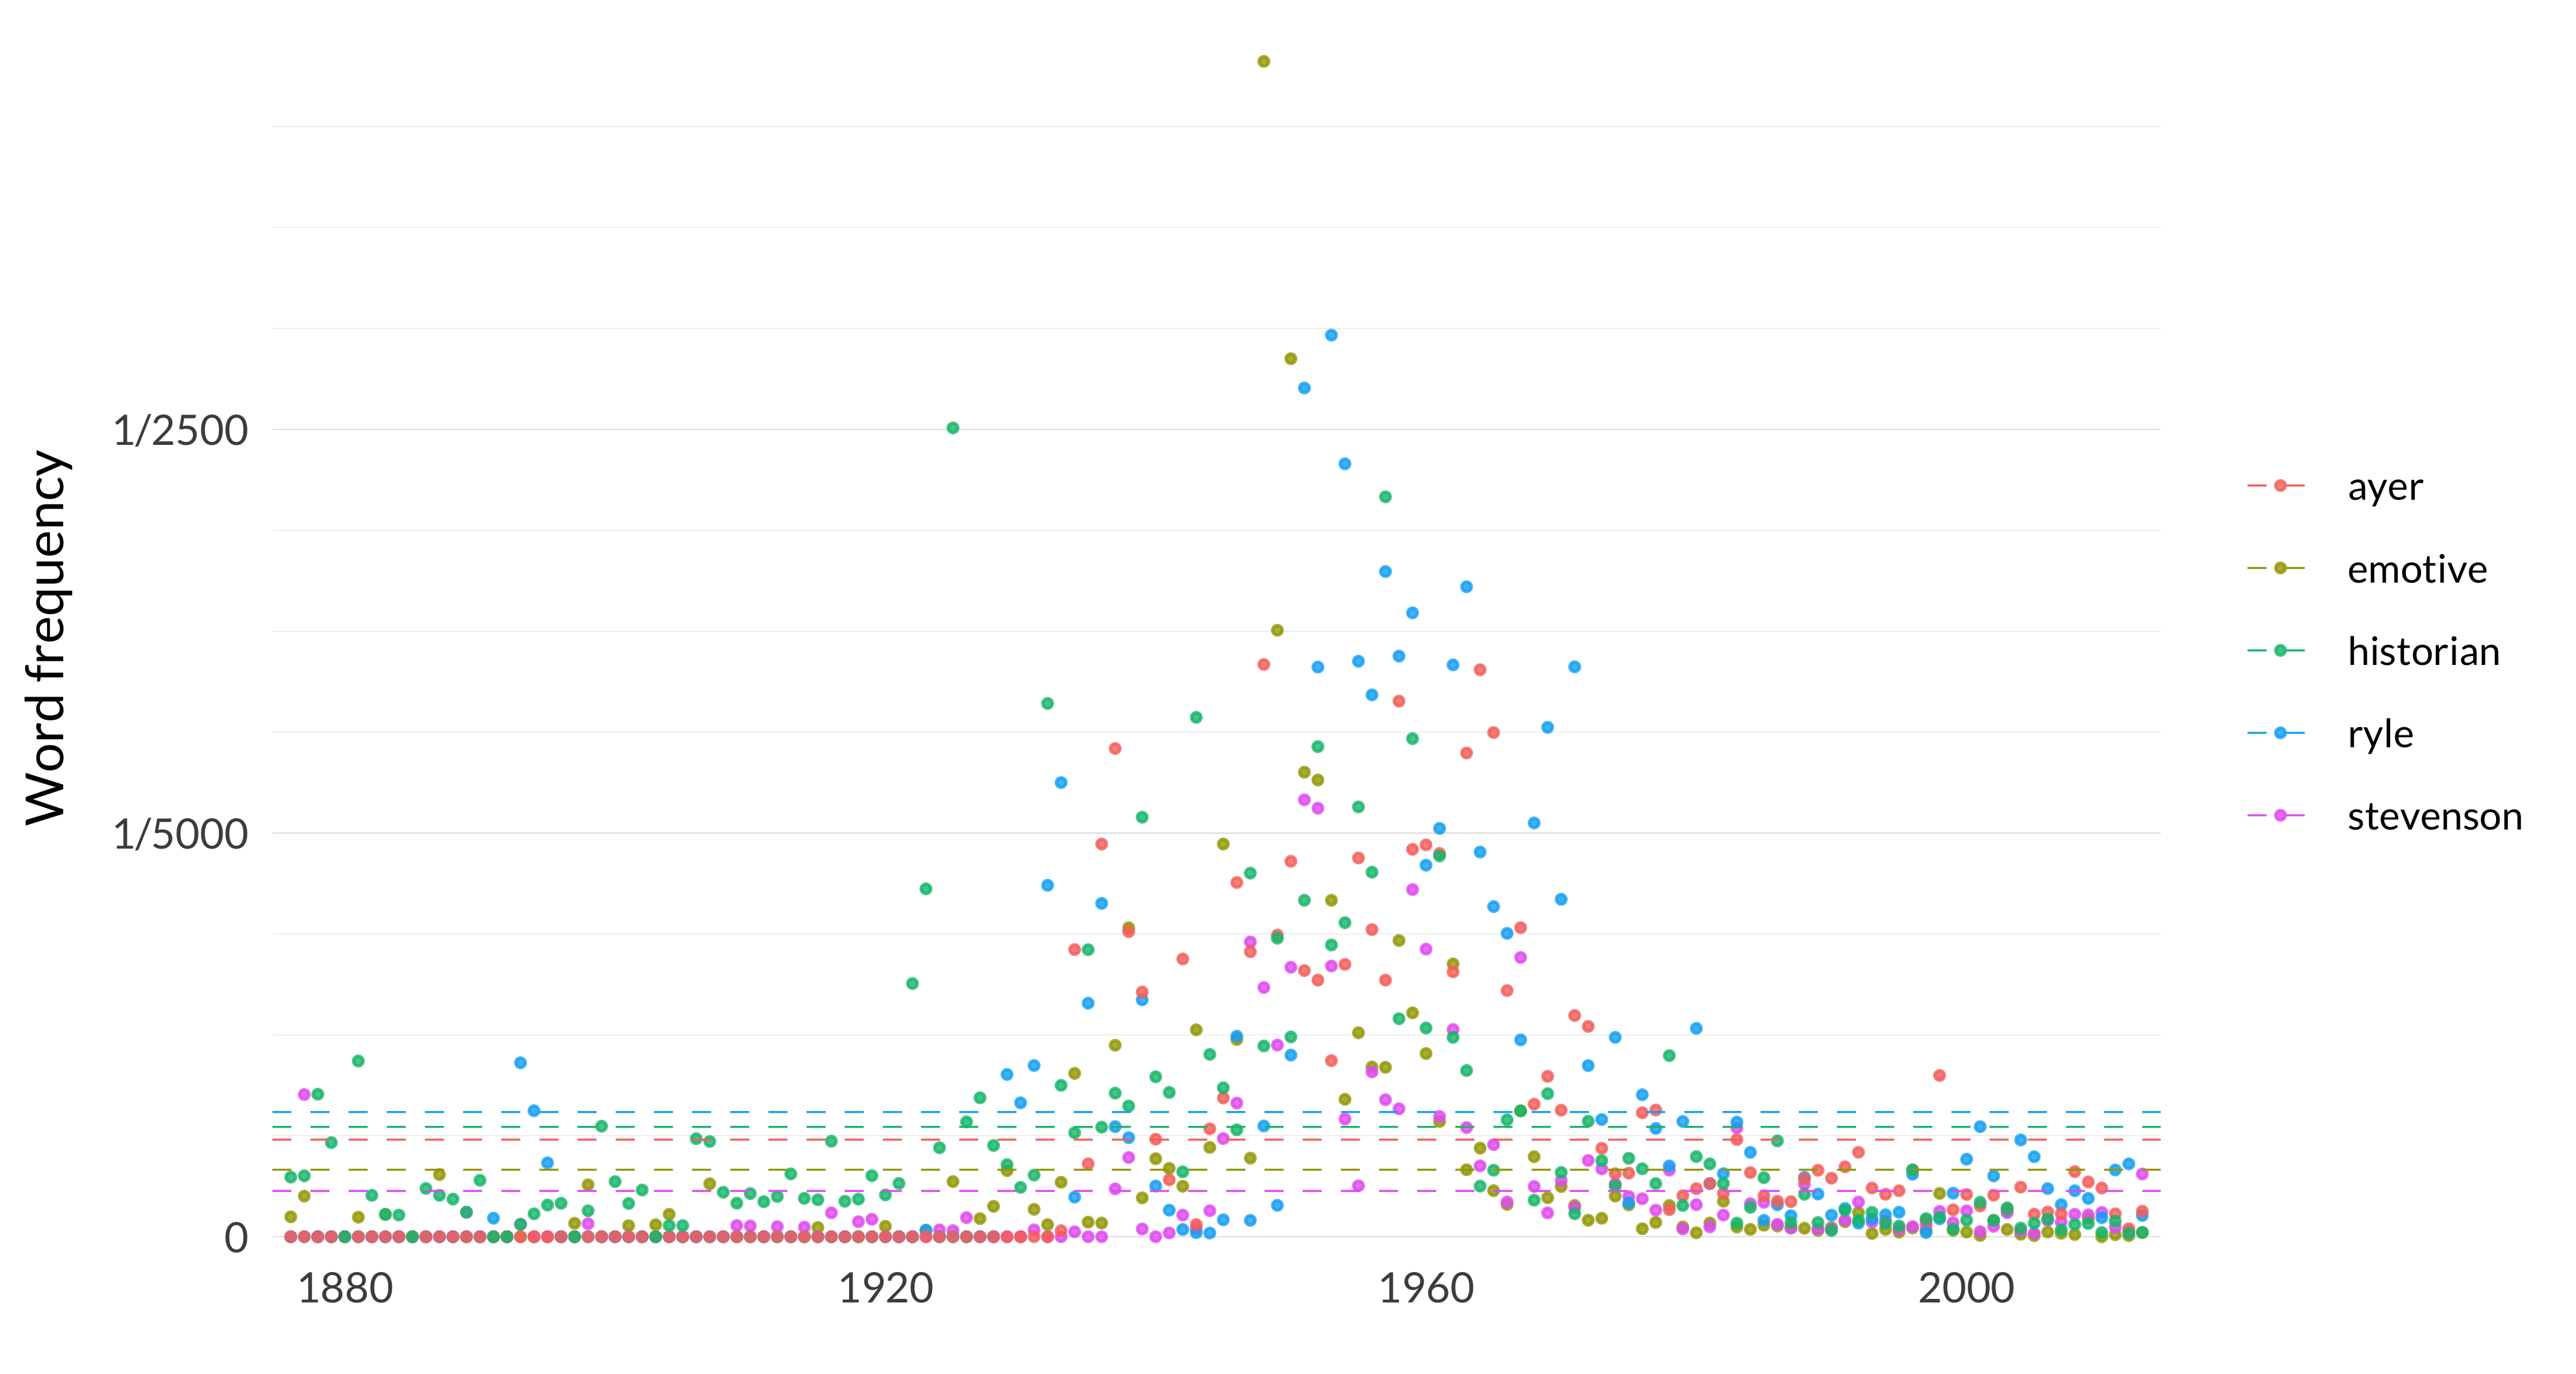 A scatterplot showing the frequency of the words emotive, stevenson, ryle, ayer, historian. The word emotive appears, on average across the years, 33 times per million words, and in the median year, it appears 6 times per million words. Its most frequent occurrence is in 1948 when it appears 582 times per million words, and its least frequent occurrence is in 1878 when it appears 0 times per million words. The word stevenson appears, on average across the years, 23 times per million words, and in the median year, it appears 6 times per million words. Its most frequent occurrence is in 1951 when it appears 216 times per million words, and its least frequent occurrence is in 1876 when it appears 0 times per million words. The word ryle appears, on average across the years, 62 times per million words, and in the median year, it appears 15 times per million words. Its most frequent occurrence is in 1953 when it appears 447 times per million words, and its least frequent occurrence is in 1876 when it appears 0 times per million words. The word ayer appears, on average across the years, 48 times per million words, and in the median year, it appears 14 times per million words. Its most frequent occurrence is in 1948 when it appears 284 times per million words, and its least frequent occurrence is in 1876 when it appears 0 times per million words. The word historian appears, on average across the years, 54 times per million words, and in the median year, it appears 26 times per million words. Its most frequent occurrence is in 1925 when it appears 401 times per million words, and its least frequent occurrence is in 1880 when it appears 0 times per million words. 